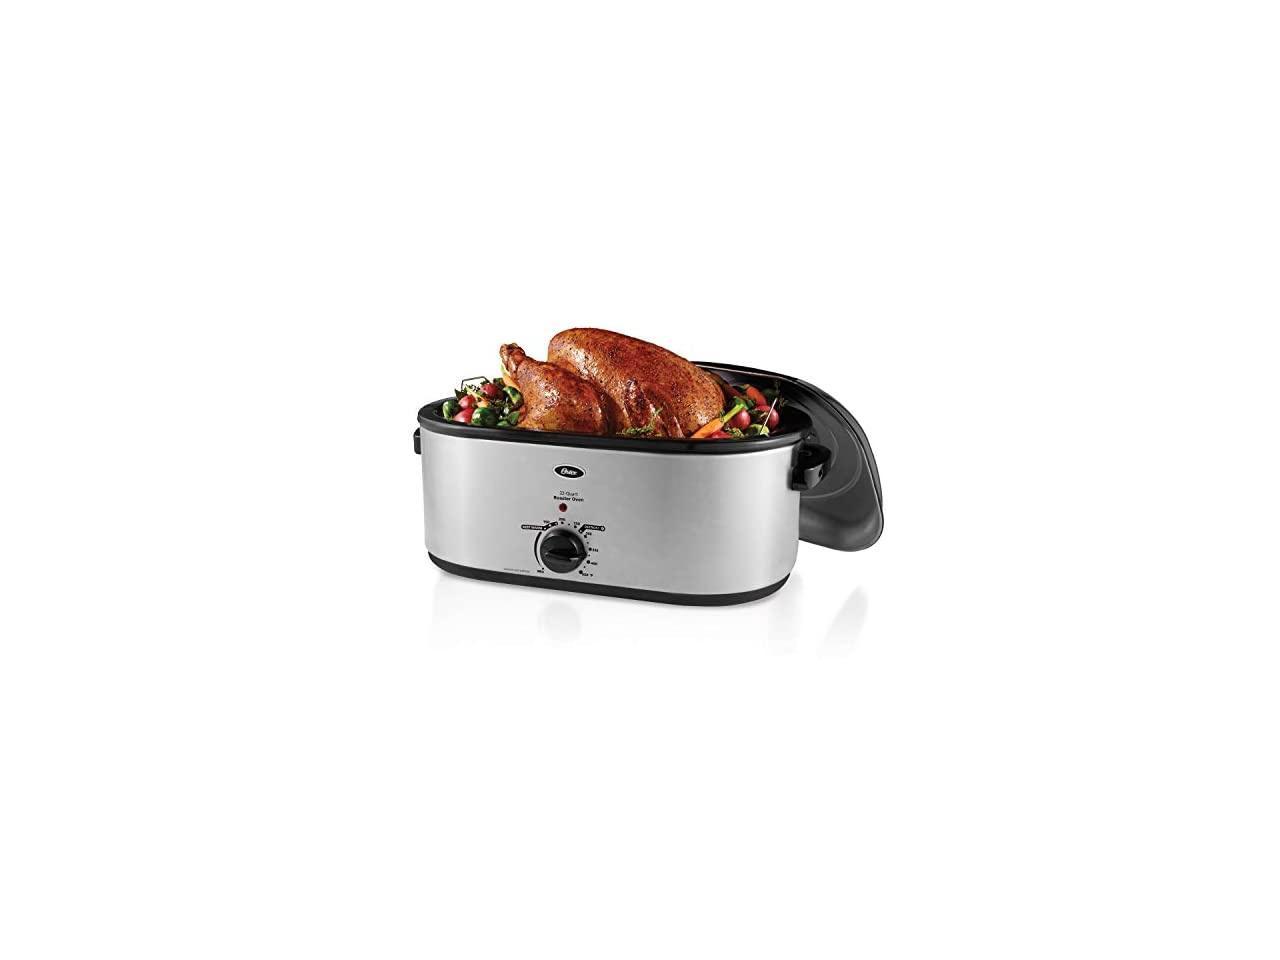 Roaster Oven Self-Basting Lid Kitchen Home Cooking Turkey Food Cooks 22.Qt Red